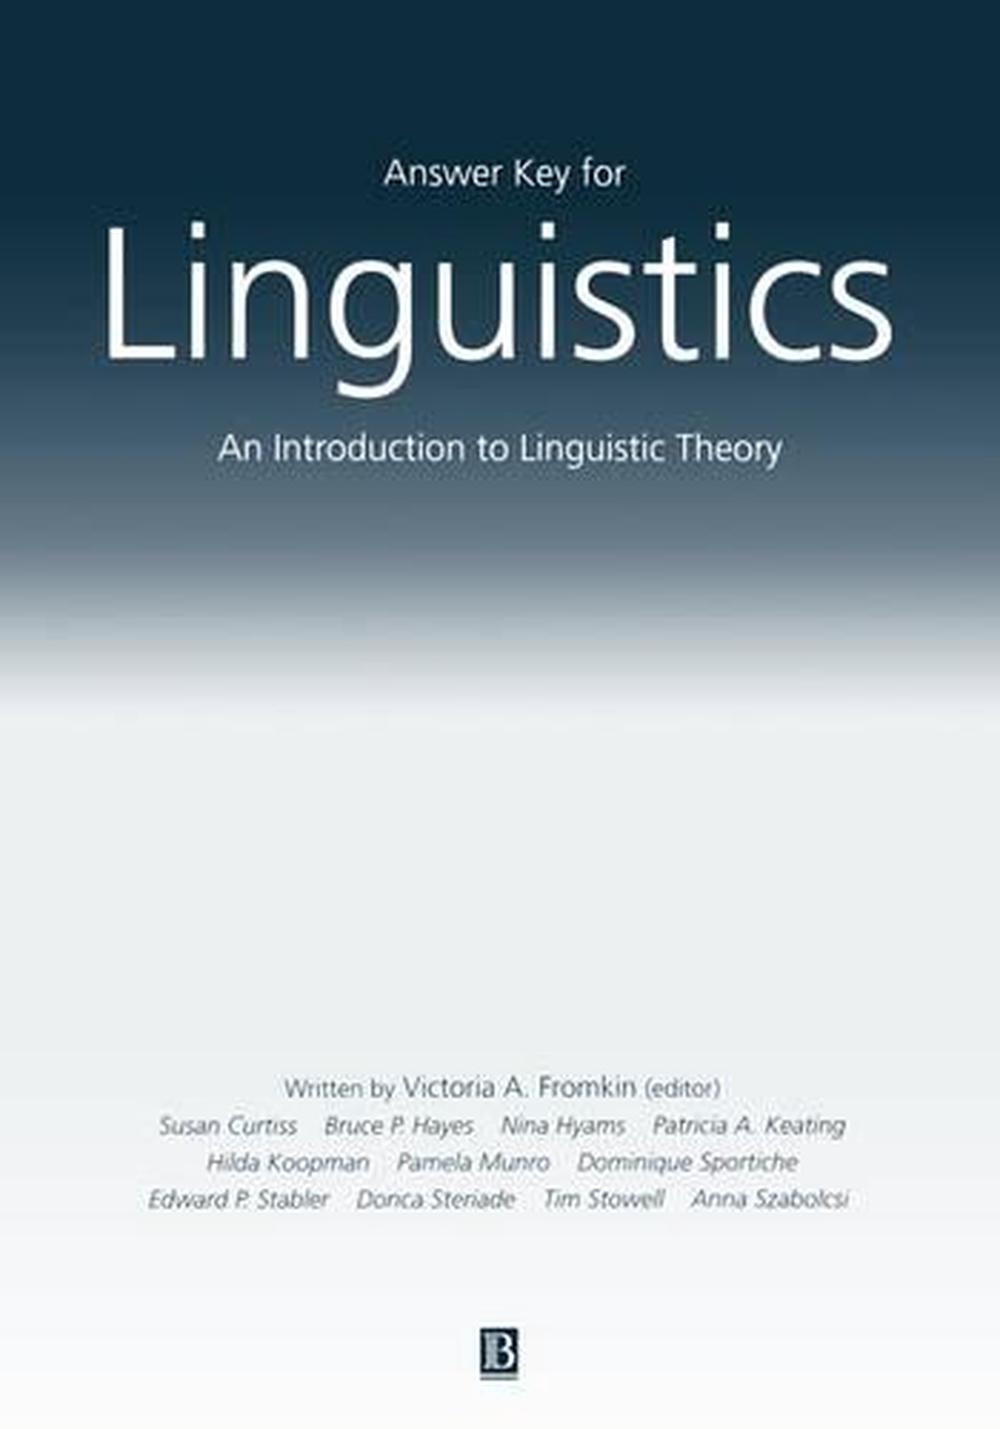 Answer Key for Linguistics An Introduction to Linguistic Theory by